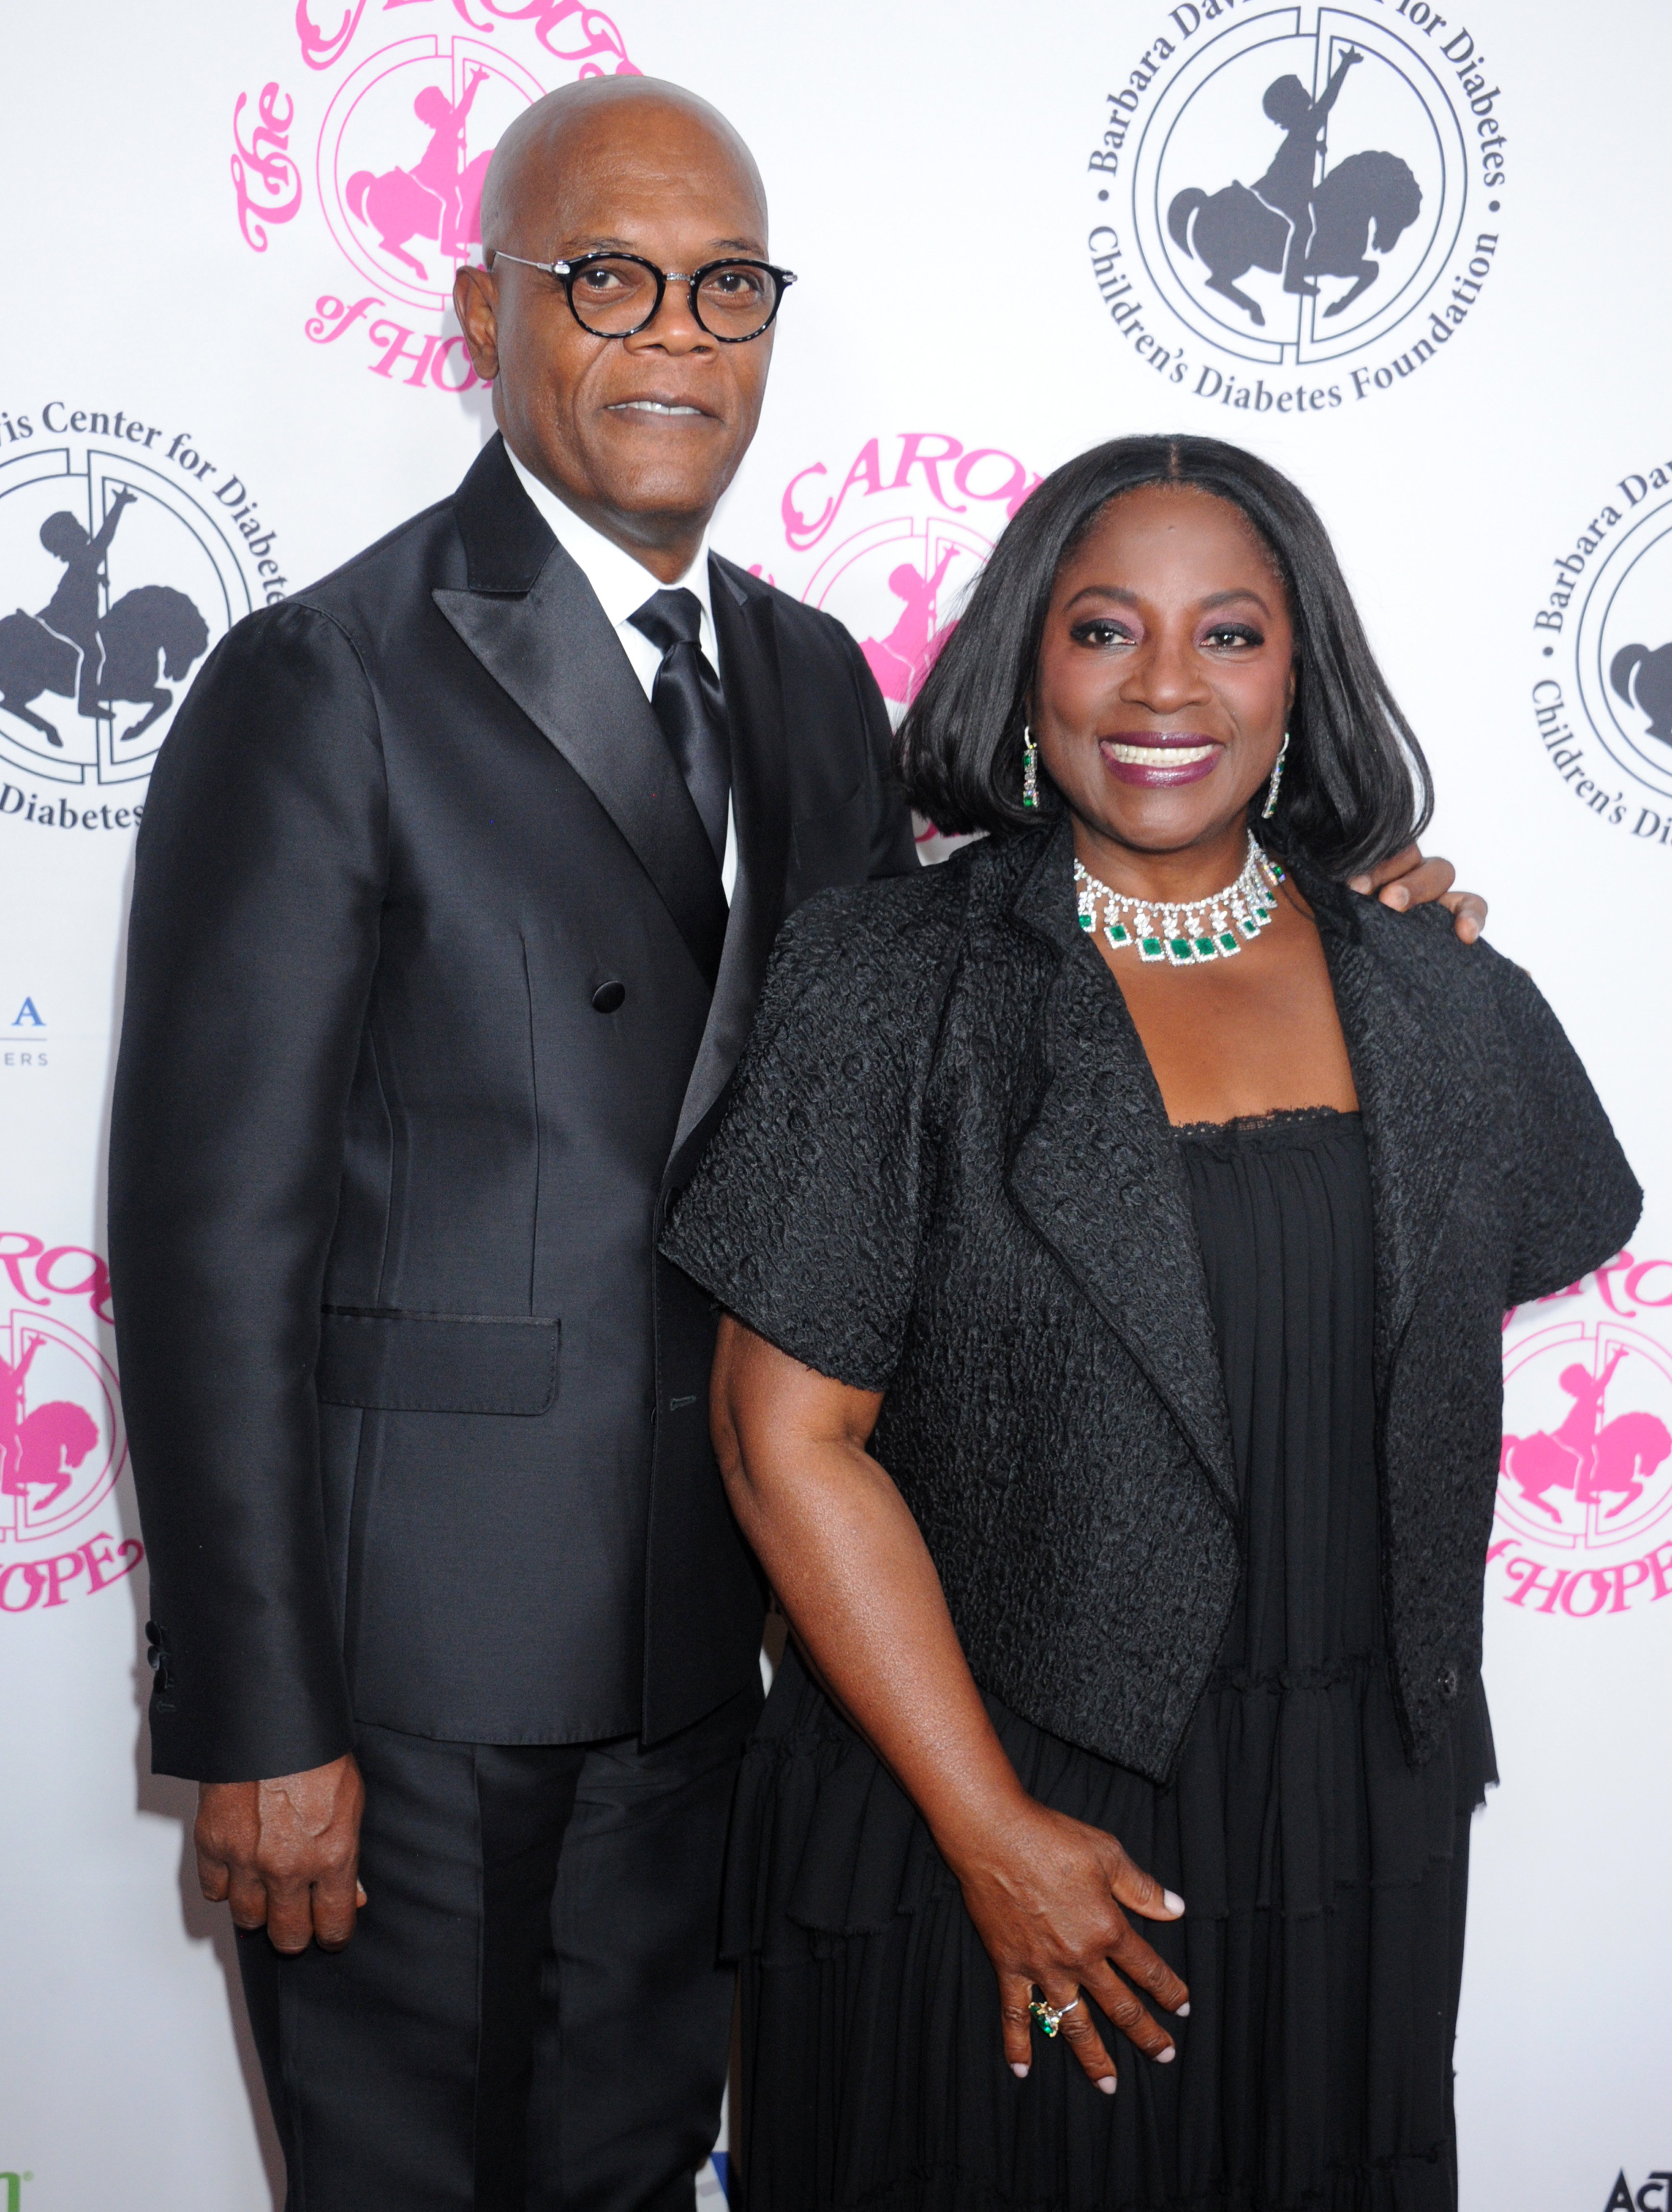 Samuel L. Jackson and LaTanya Richardson arrive at the 2016 Carousel Of Hope Ball at The Beverly Hilton Hotel on October 8, 2016, in Beverly Hills, California. | Source: Getty Images